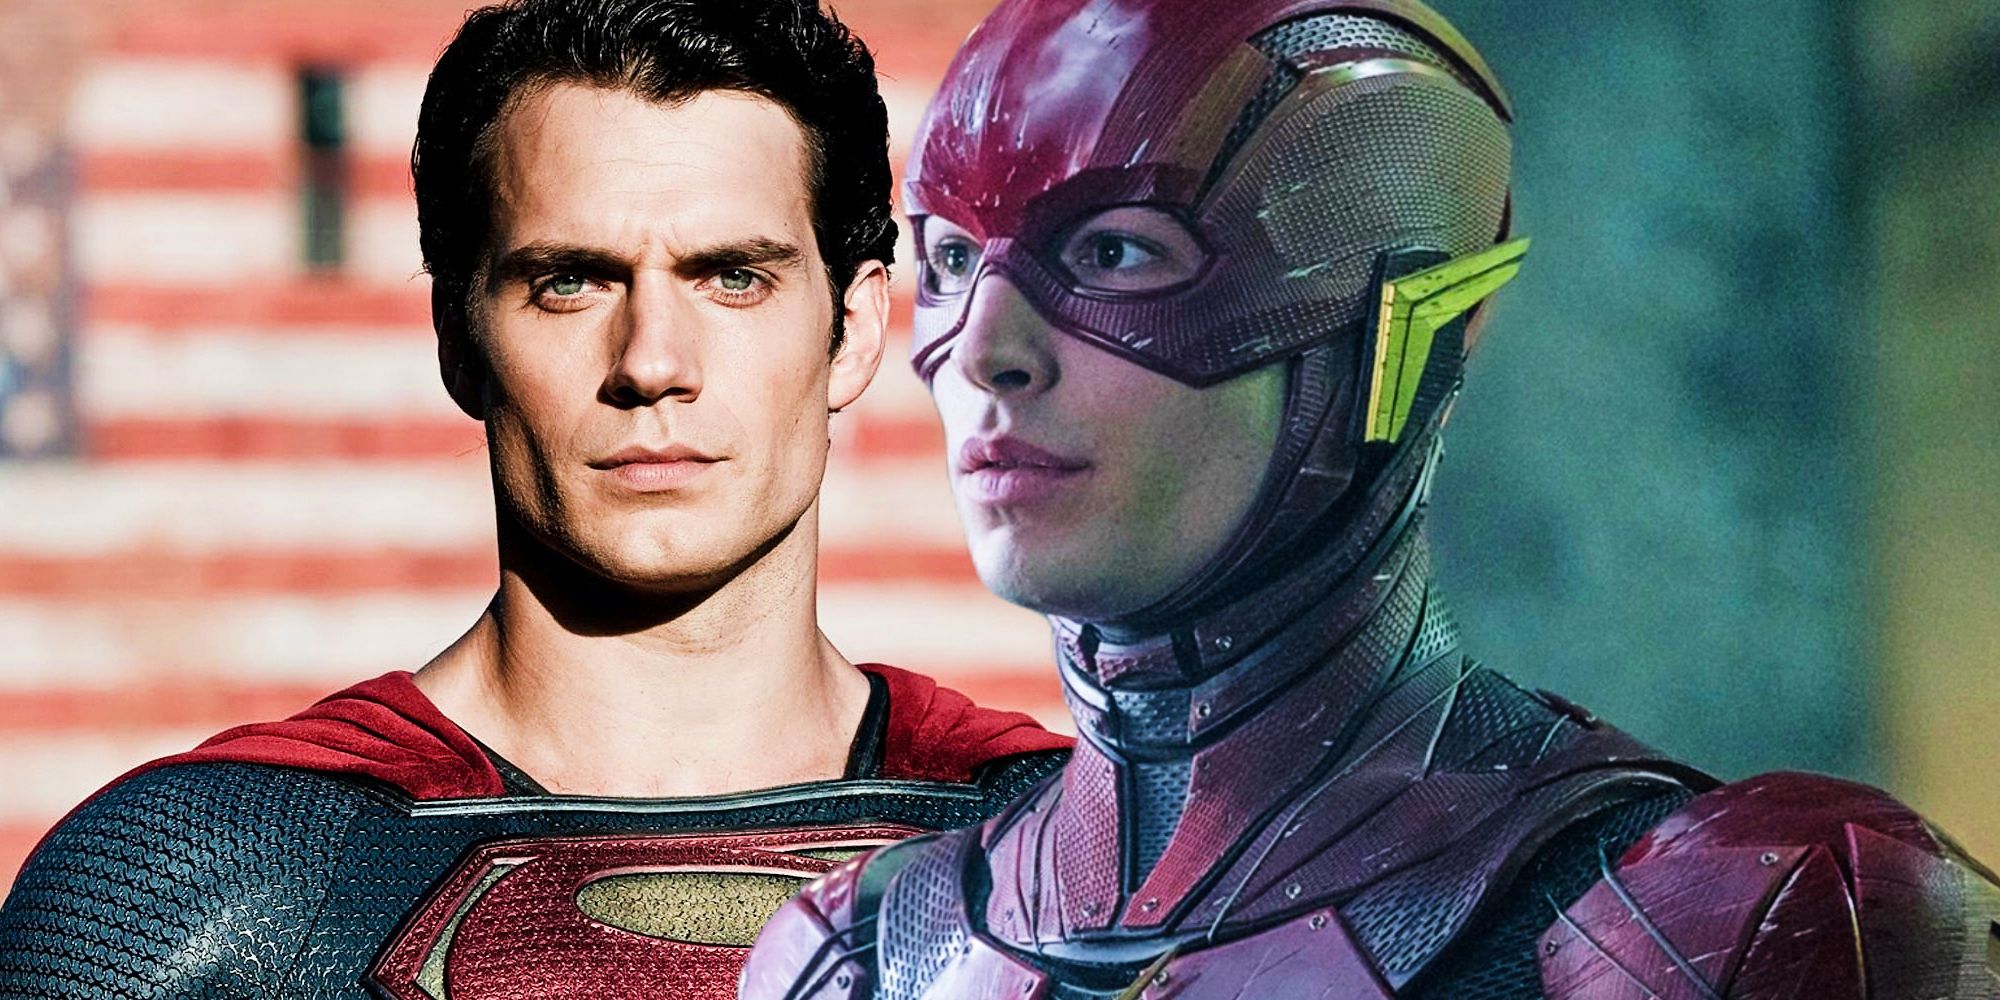 Henry Cavill as Superman in Man of Steel and Ezra Miller as Flash in Justice League